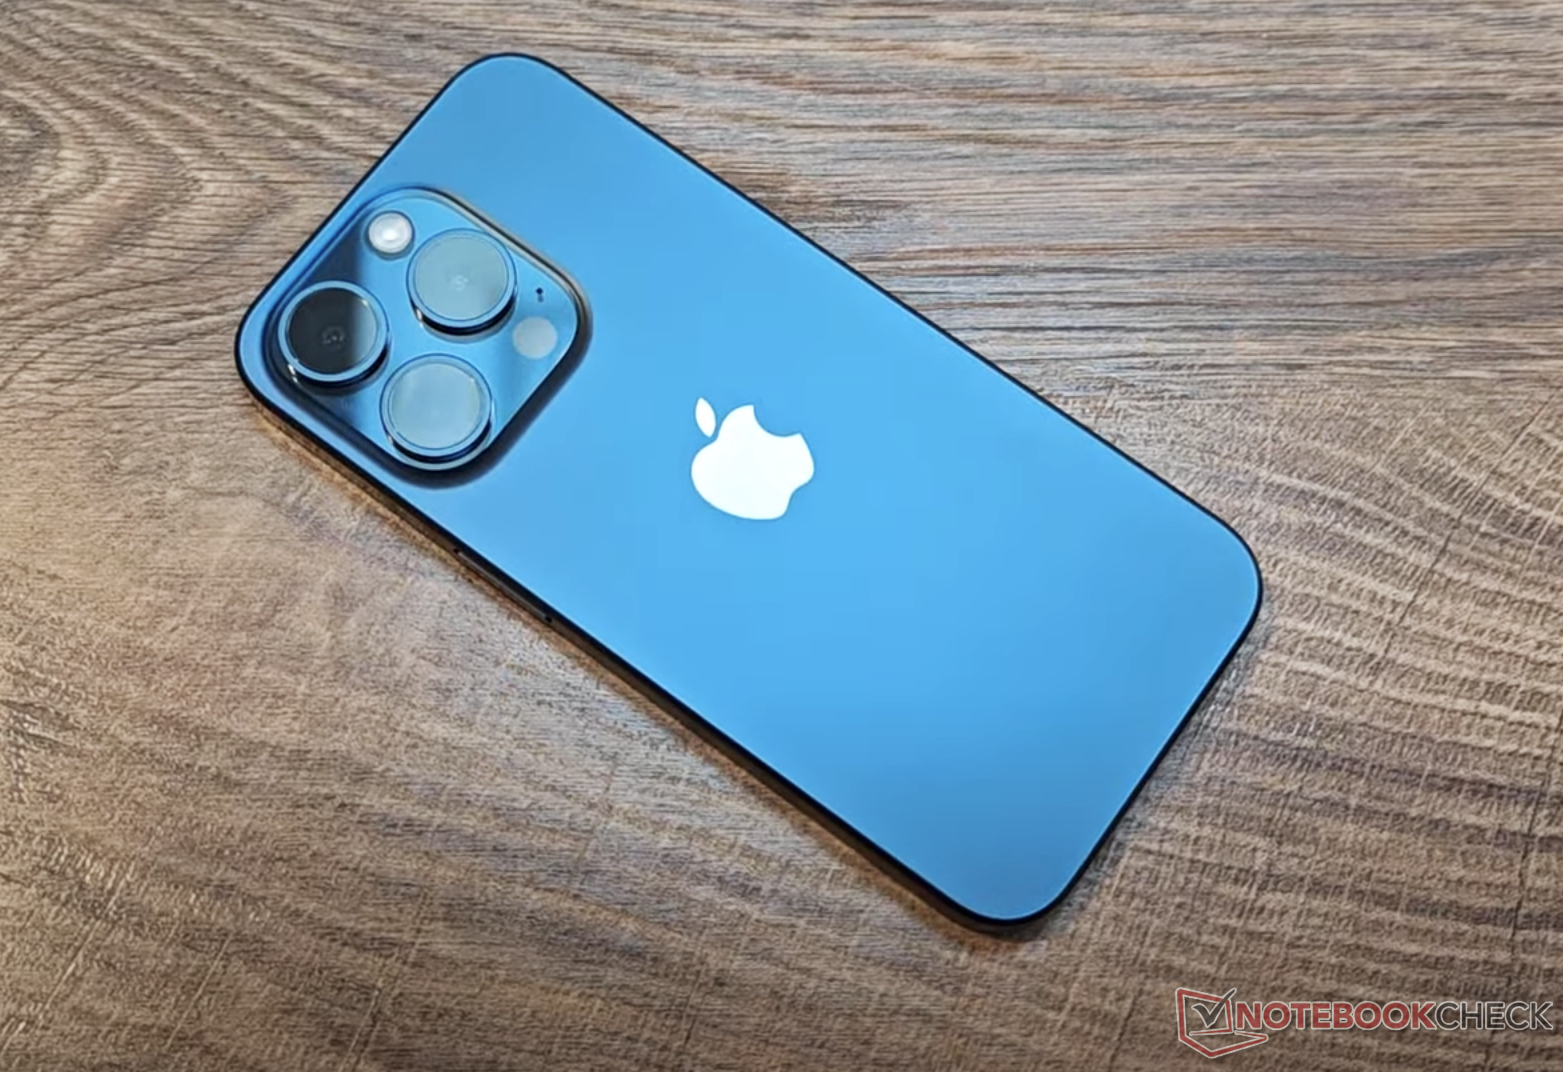 New iPhone 16 Pro Max rumor points to a significant camera sensor upgrade